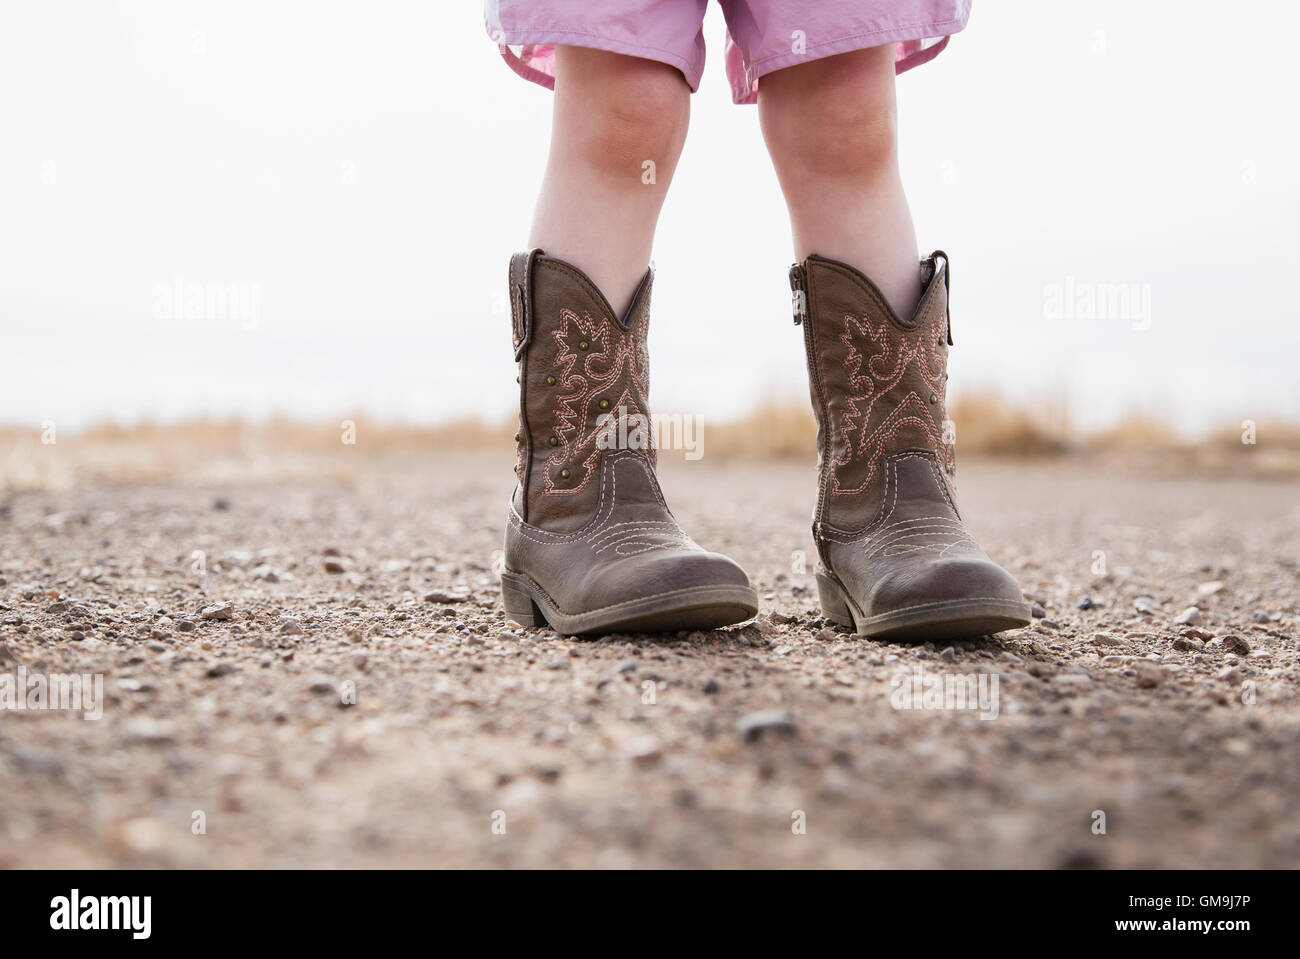 Woman in Western Wear in Cowboy Hat, Jeans and Cowboy Boots. Stock Image -  Image of girl, farm: 112660193